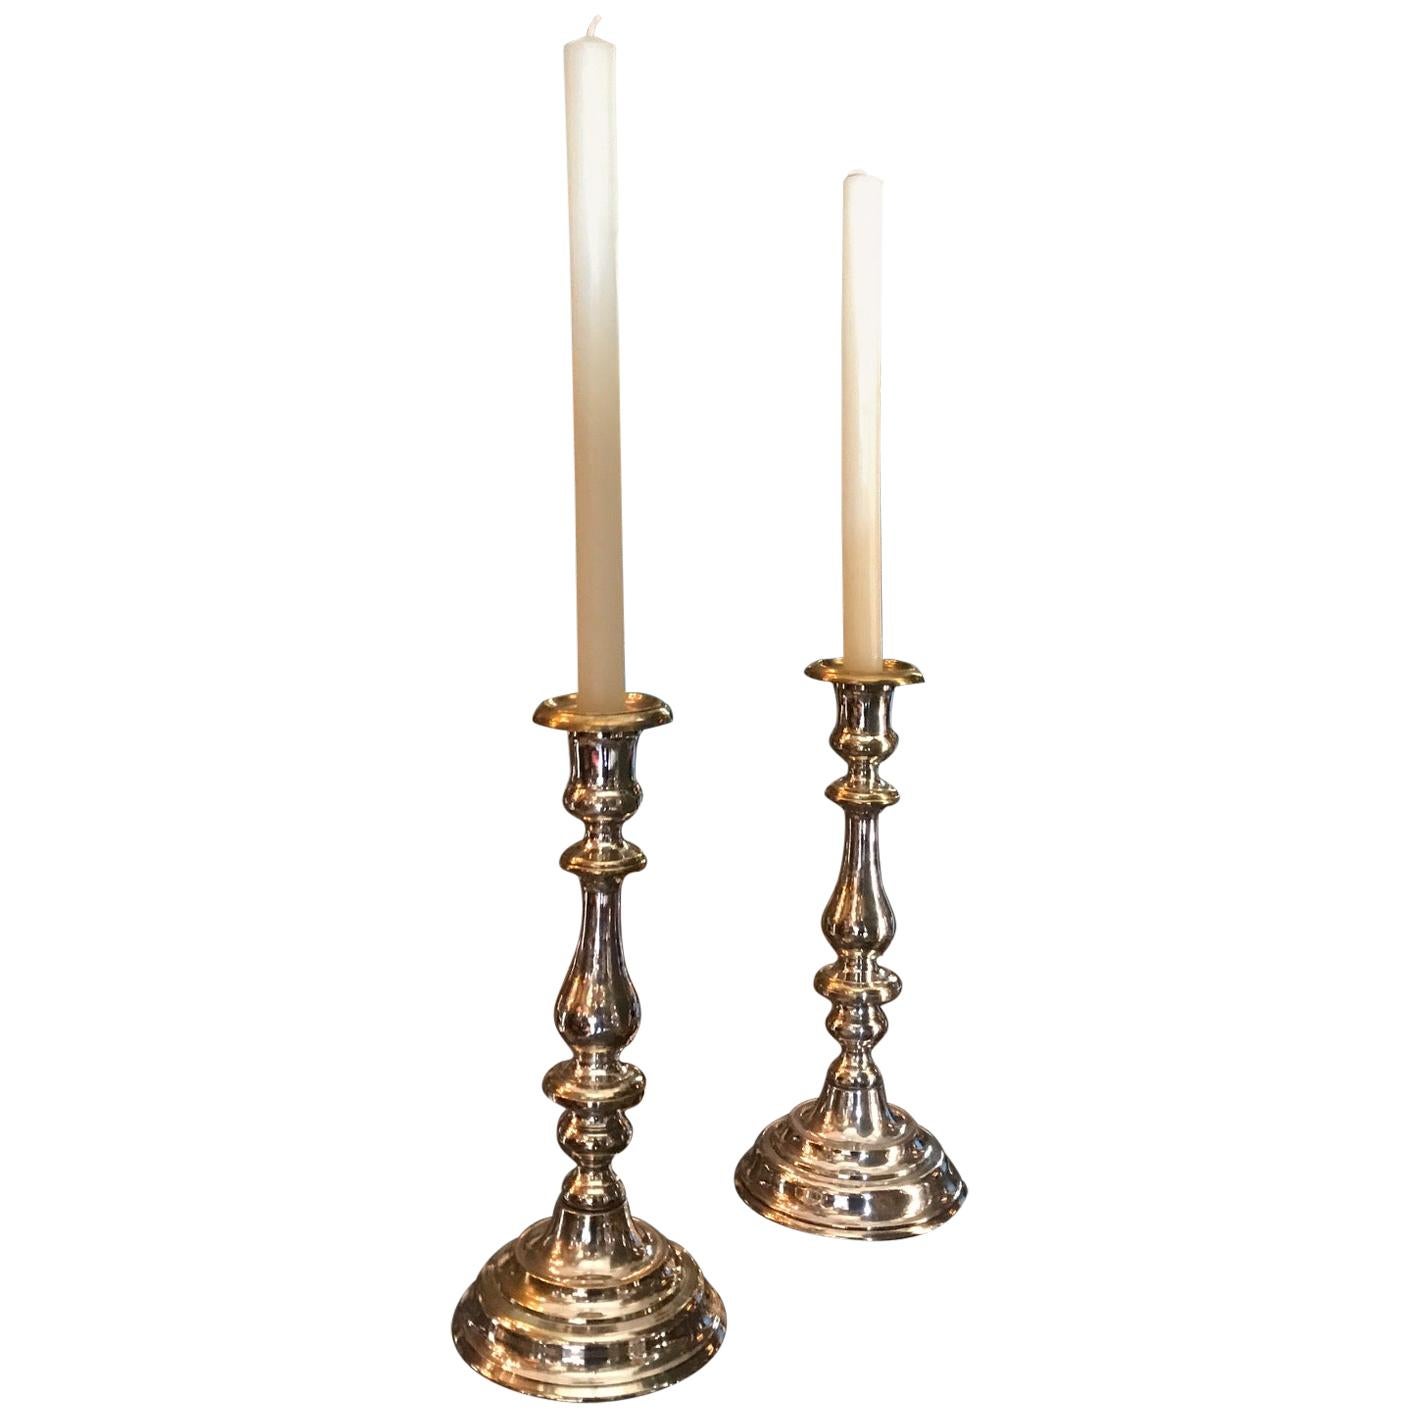 19th Century Candlesticks Candleholder Silver Plated Decorative Object, LA, Pair For Sale